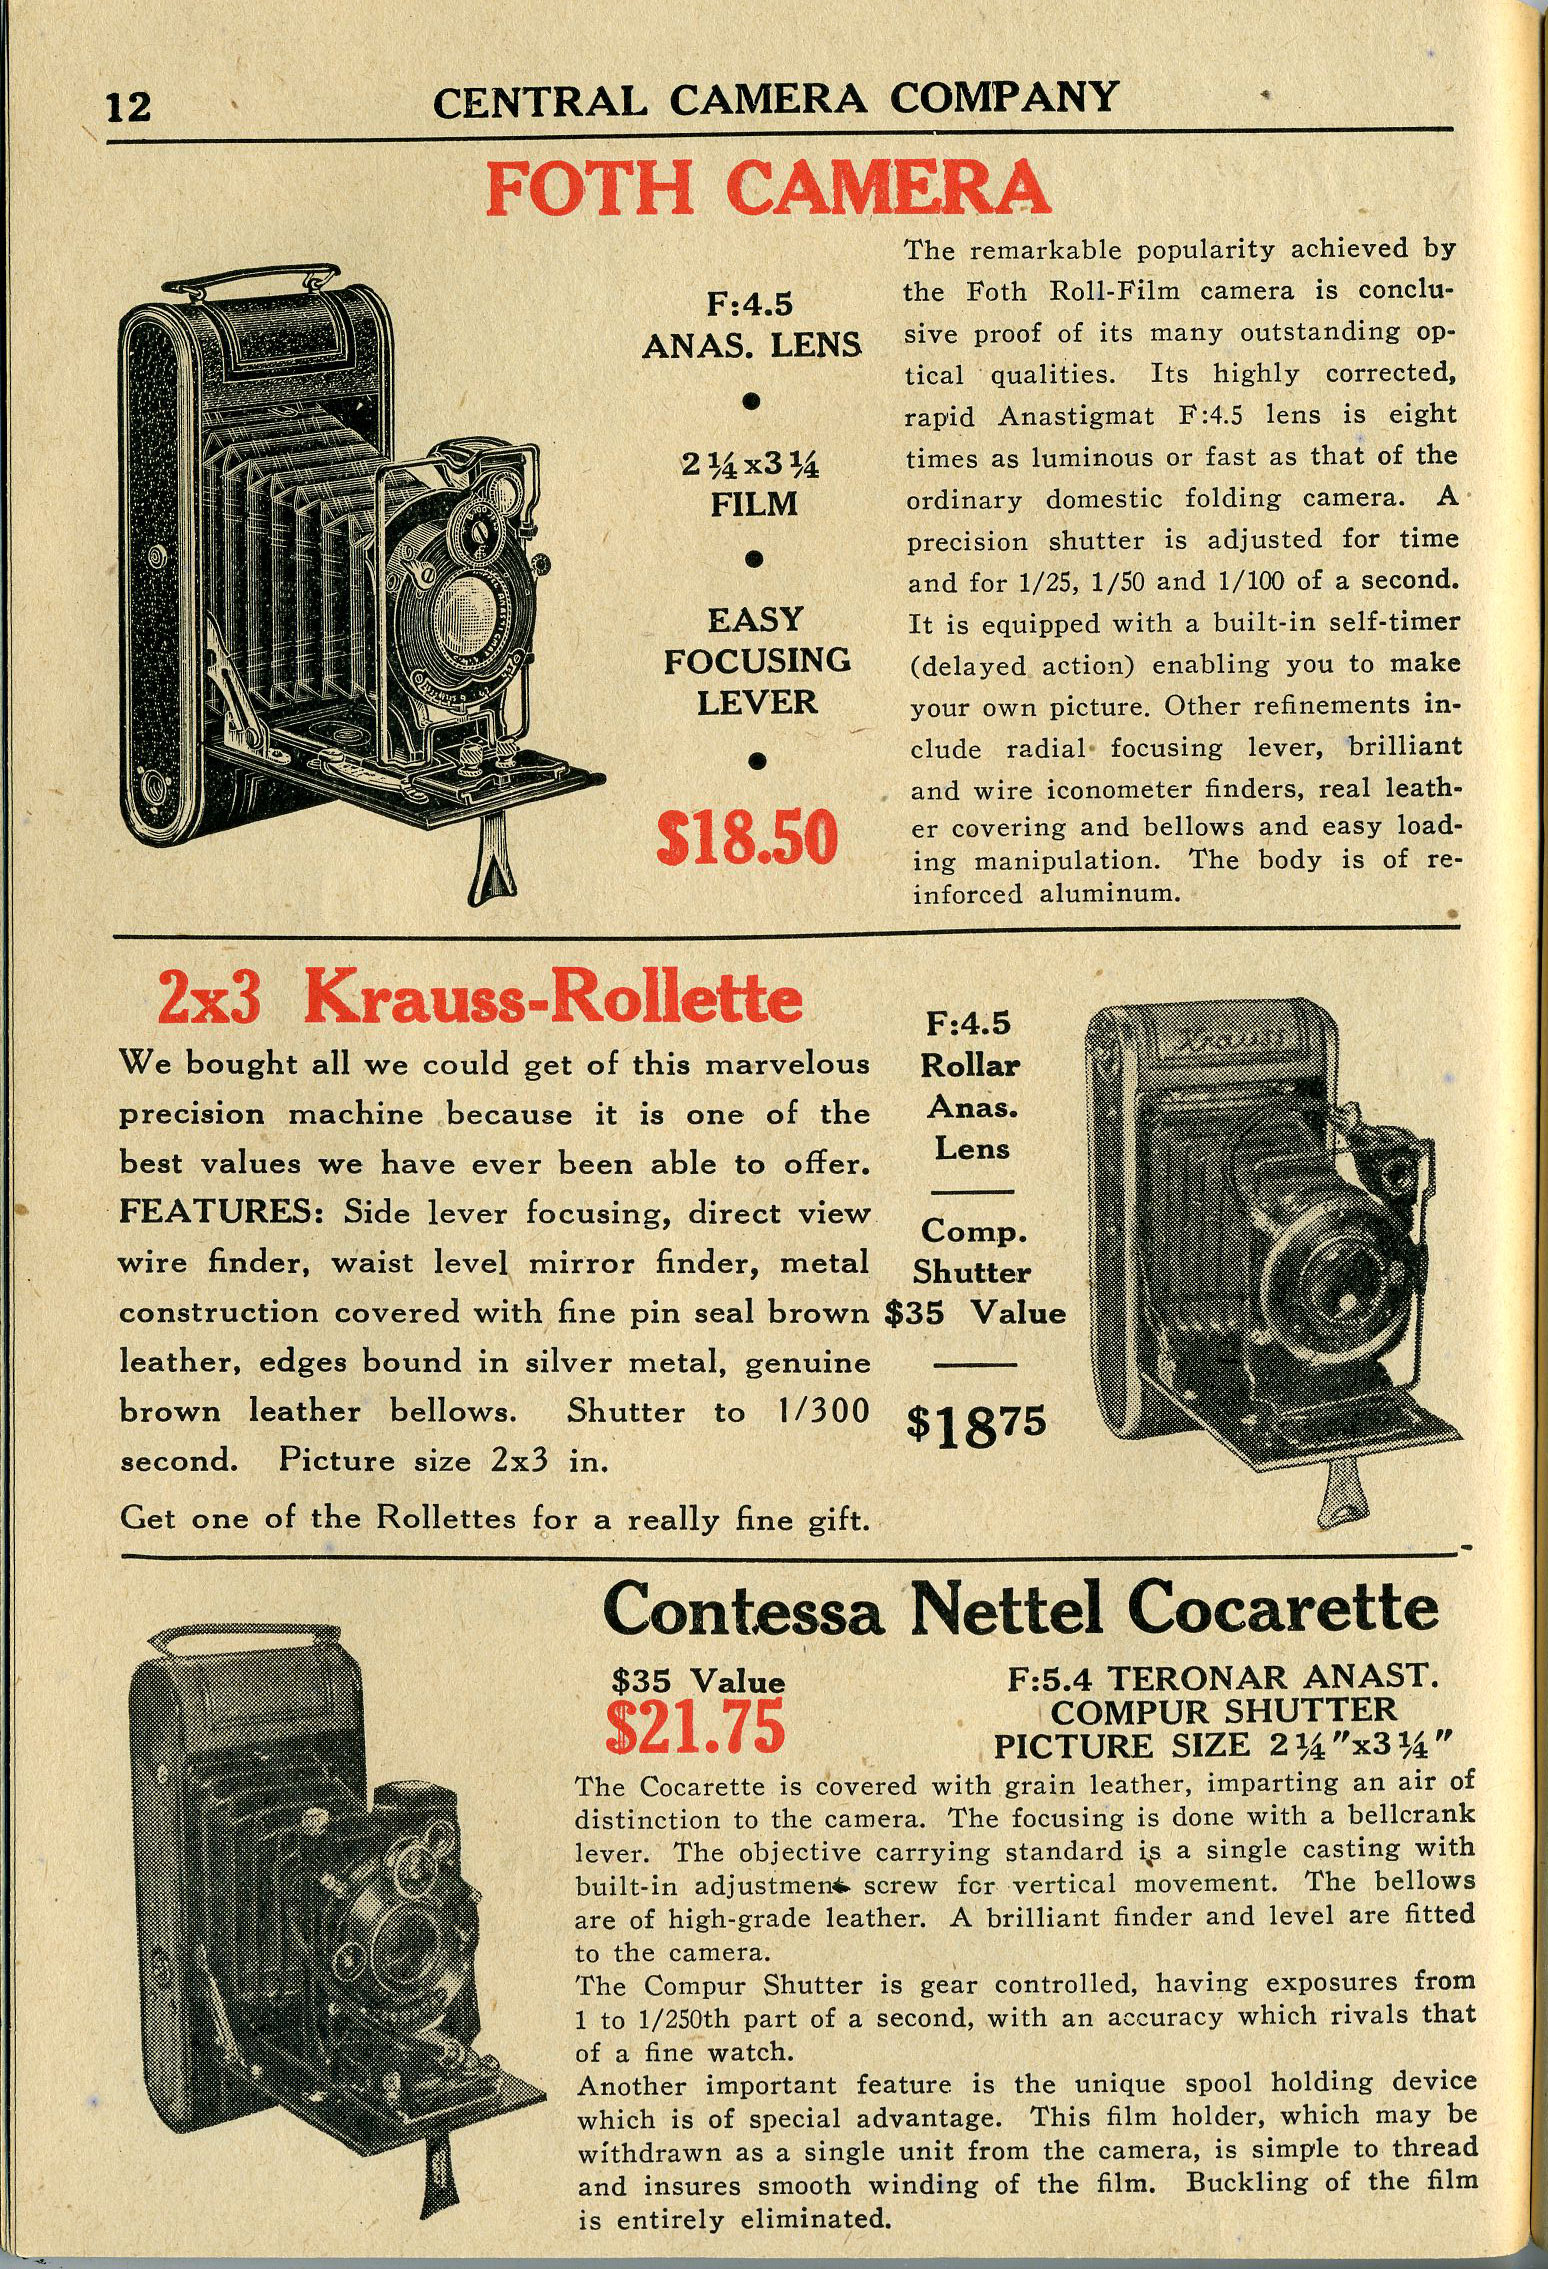 an old fashioned advertit for an electric company